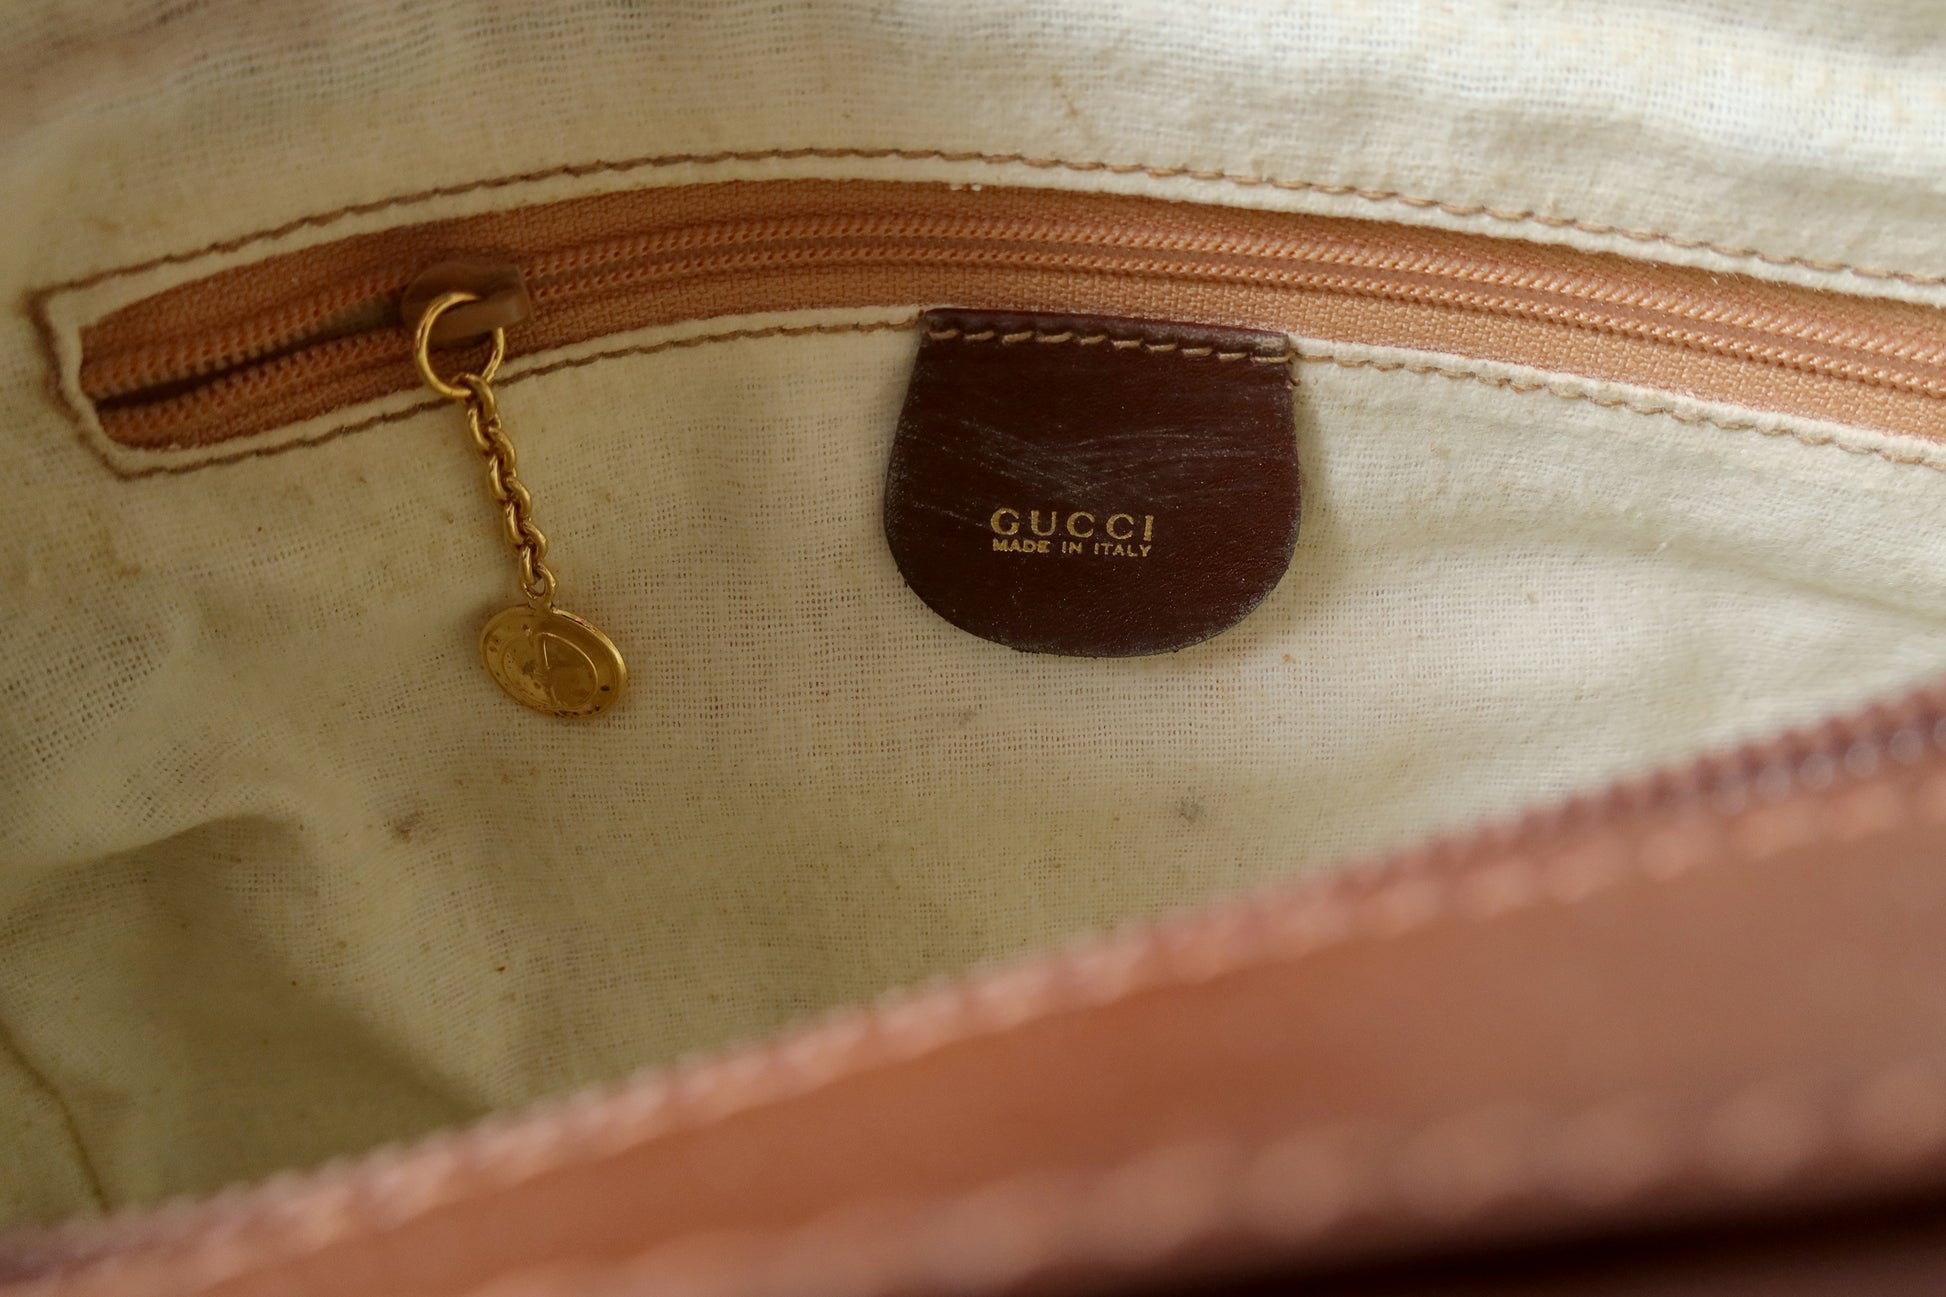 Gucci Vintage Brown Boston Bag with Bamboo Handles - The Tanpopo Room